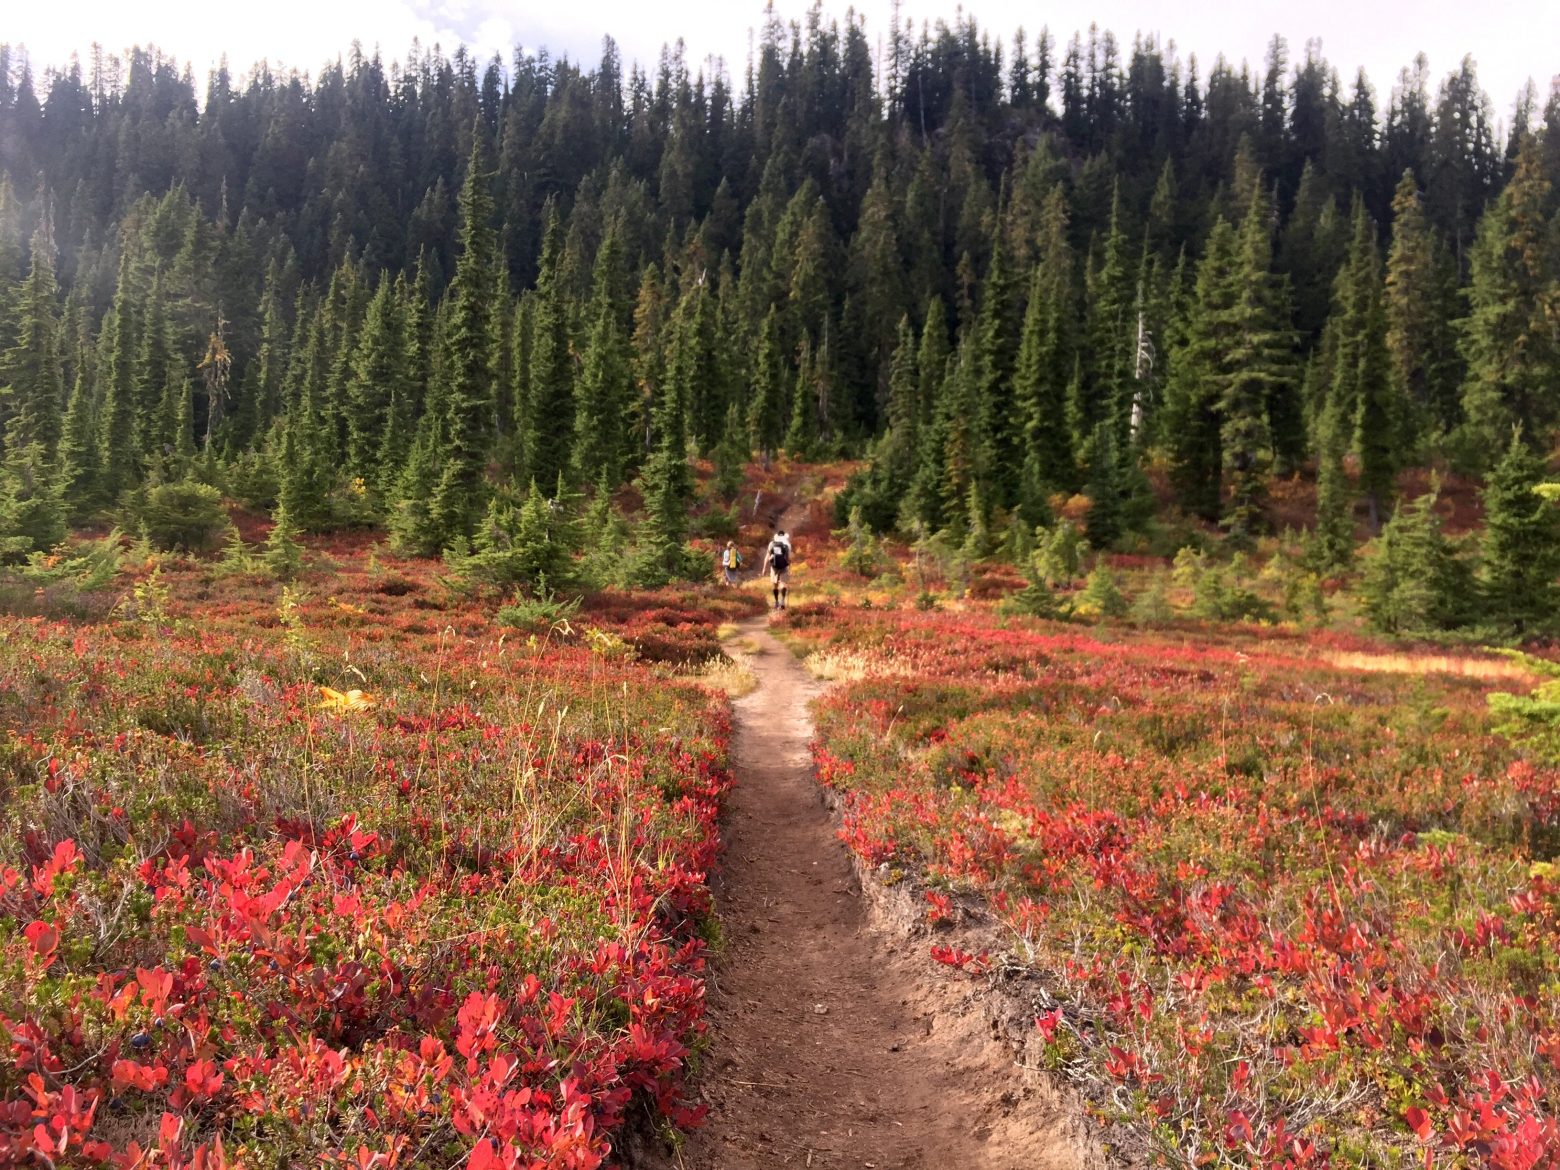 PCT towards evergreen forest through meadow of red foliage